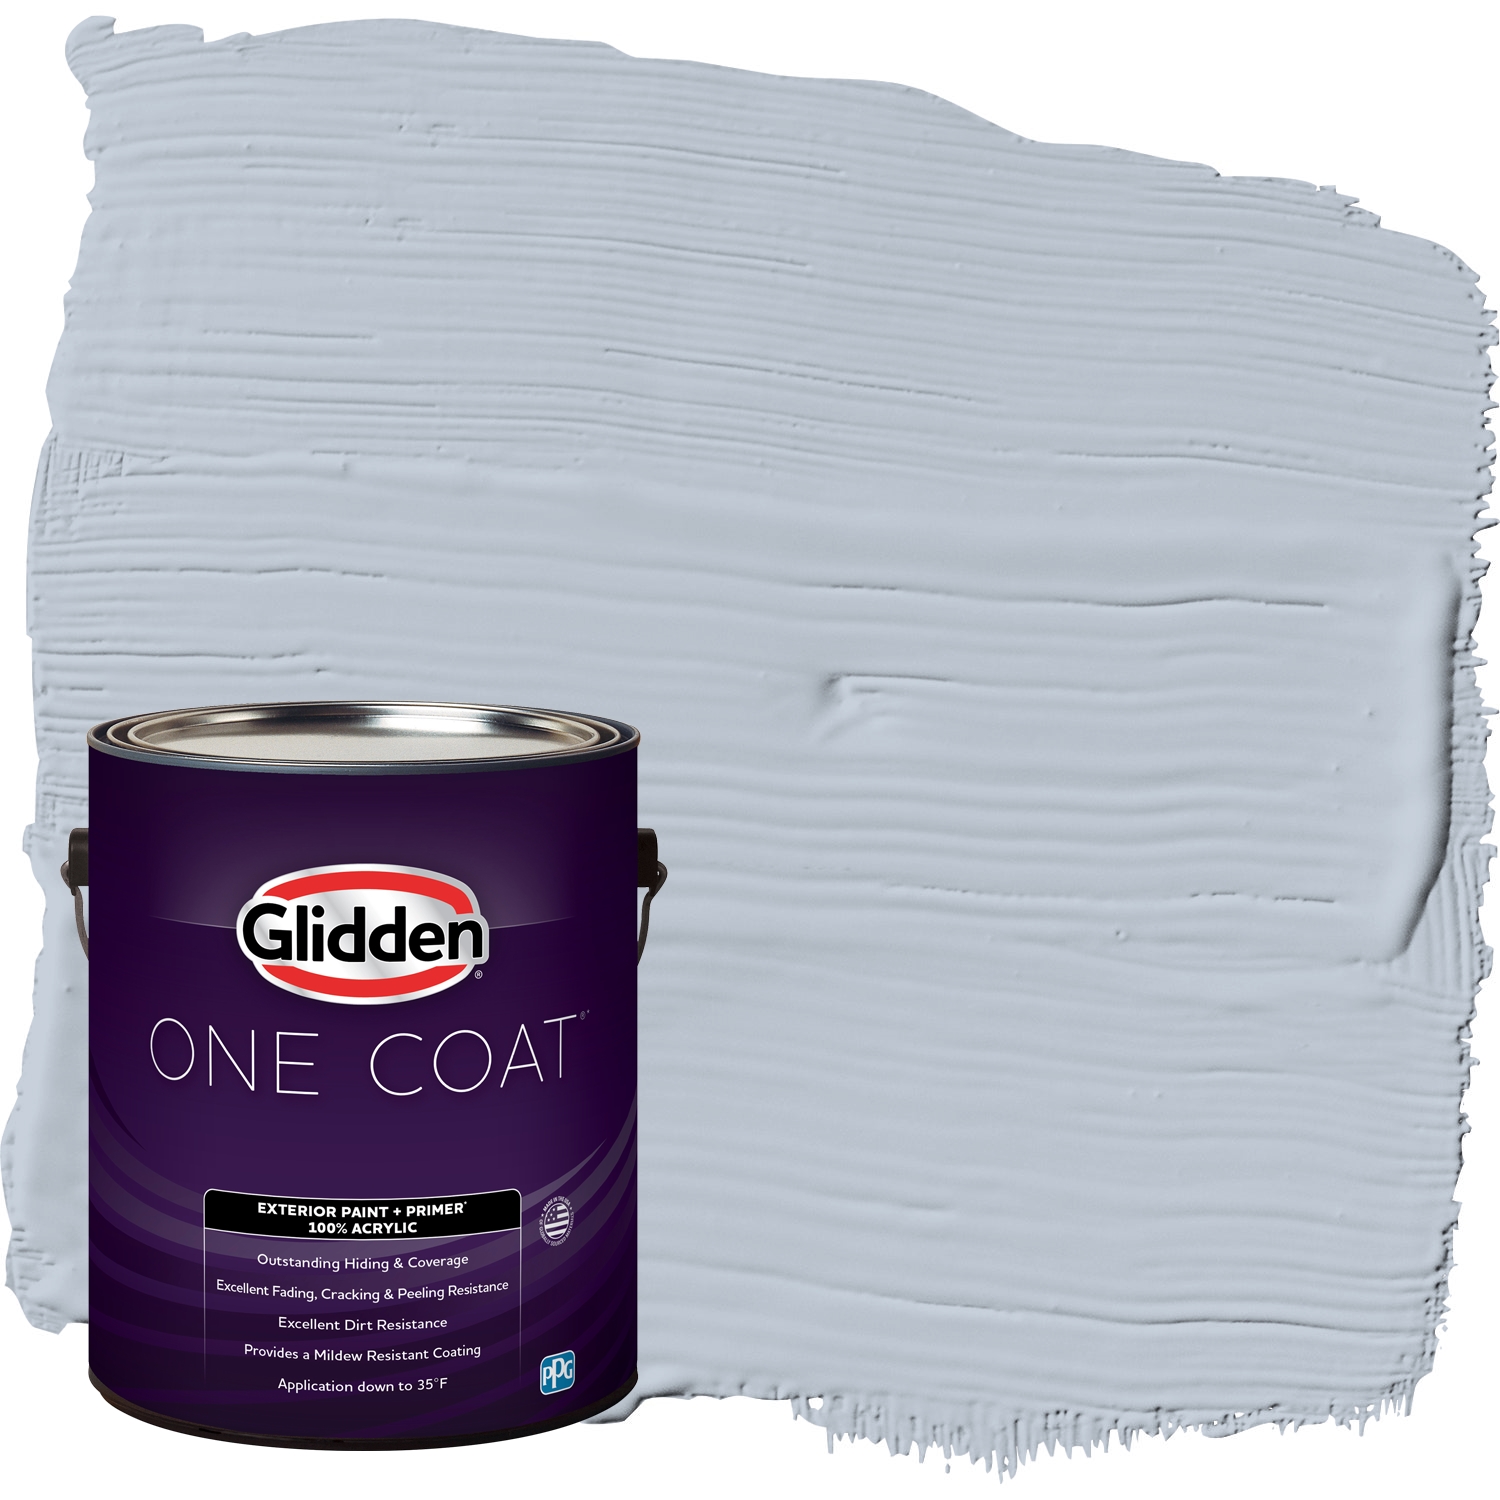 Glidden One Coat Exterior Paint and Primer, Blue Dolphin / Blue, Gallon, Flat - image 1 of 7